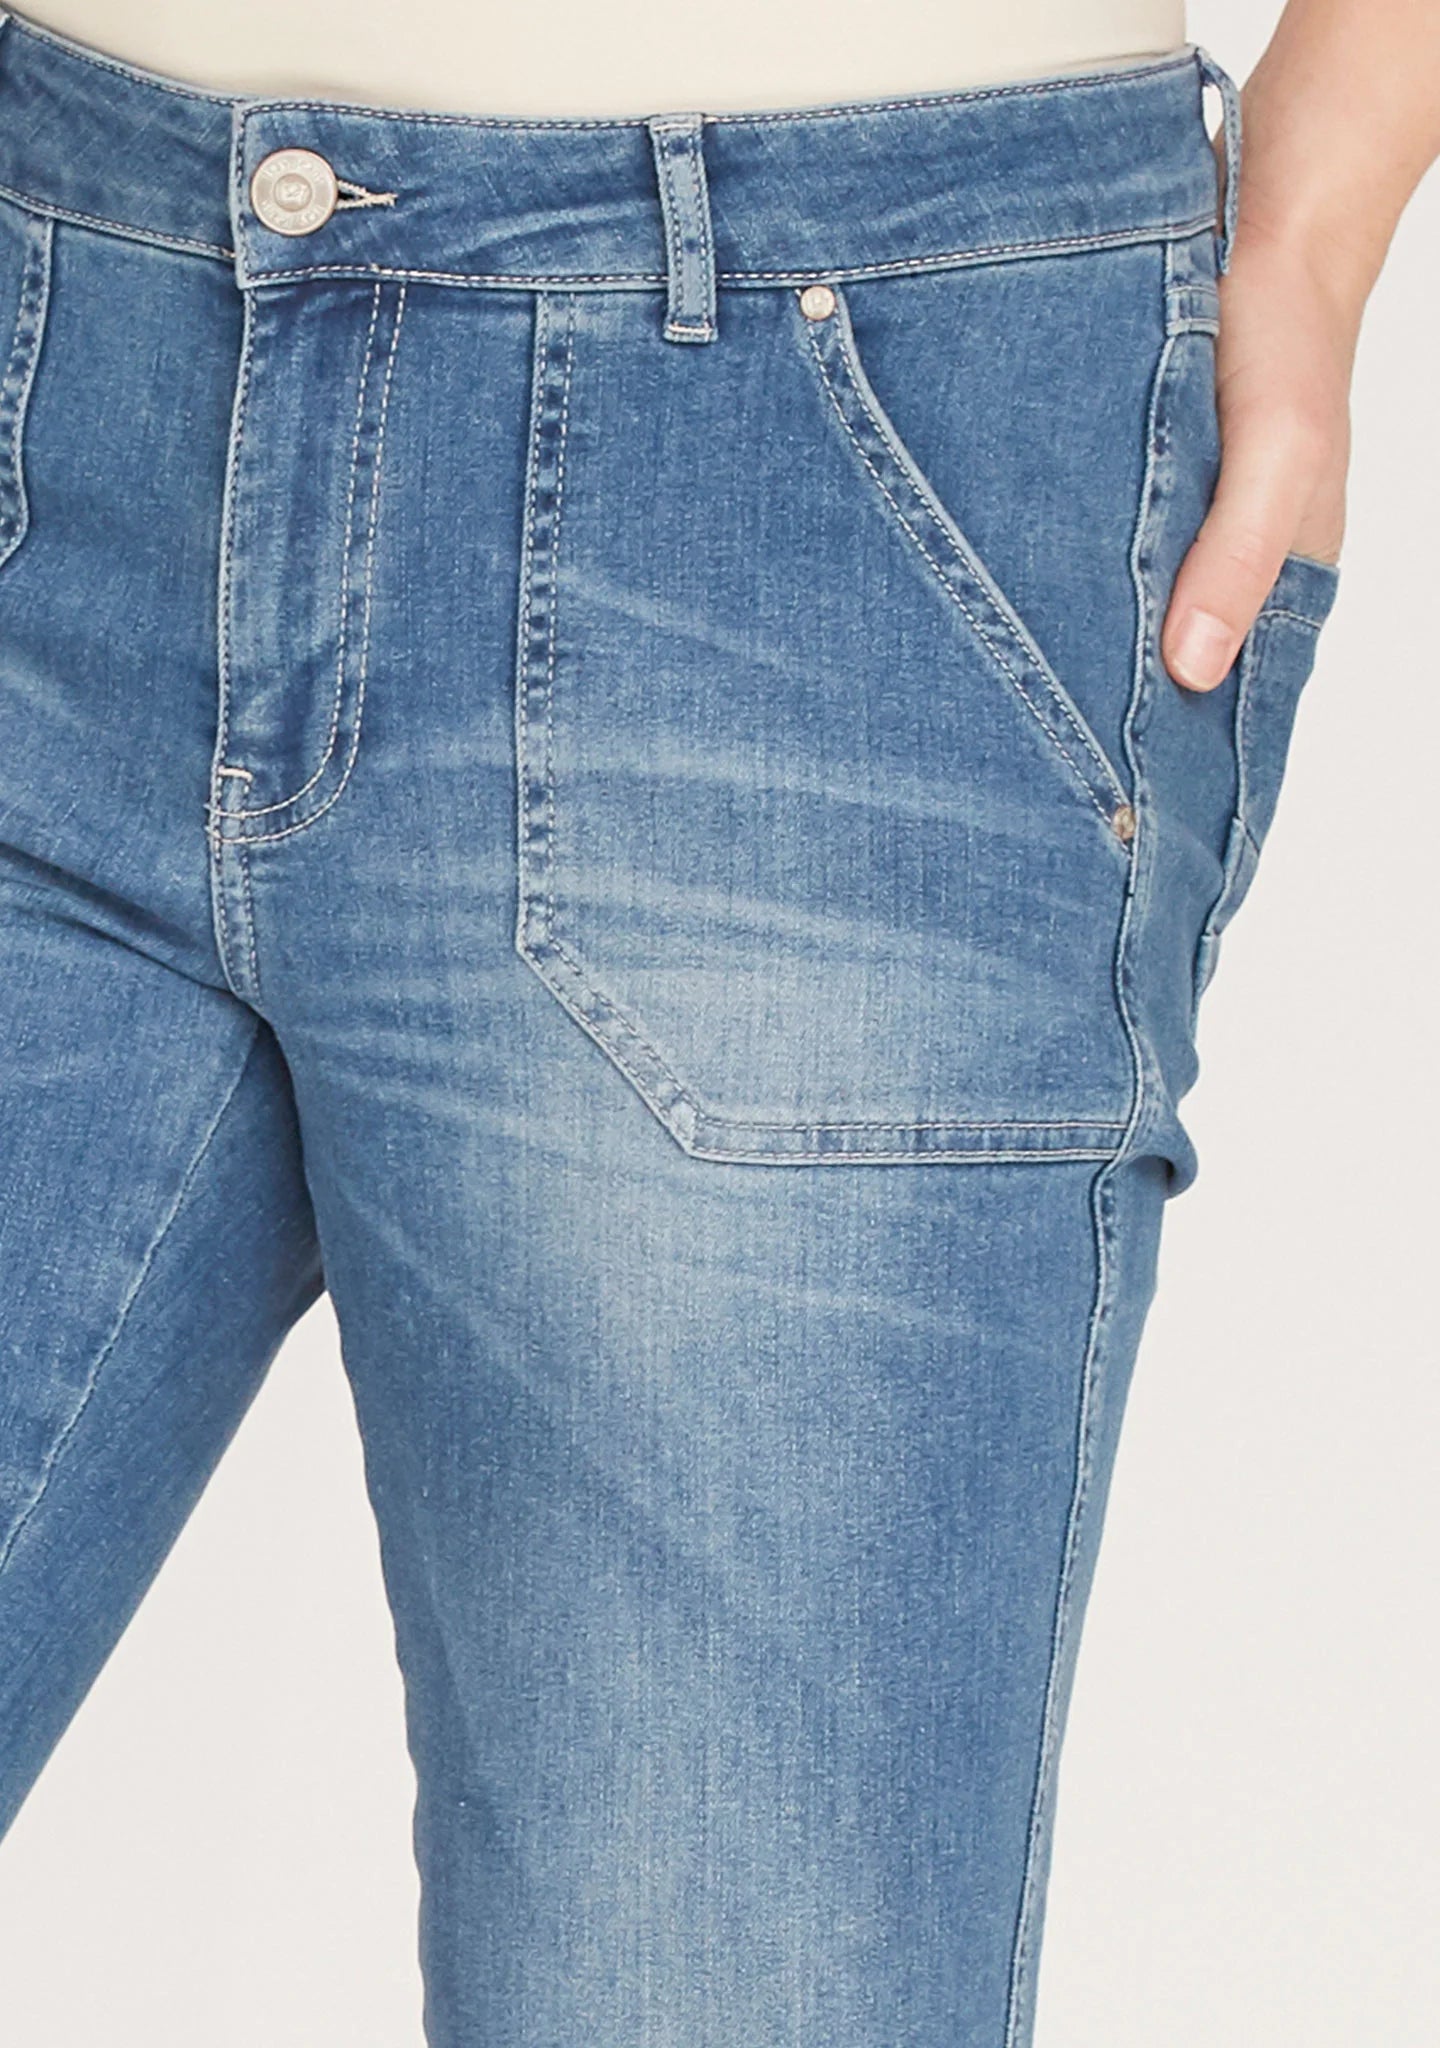 Isay Como Flare Jeans blue wash